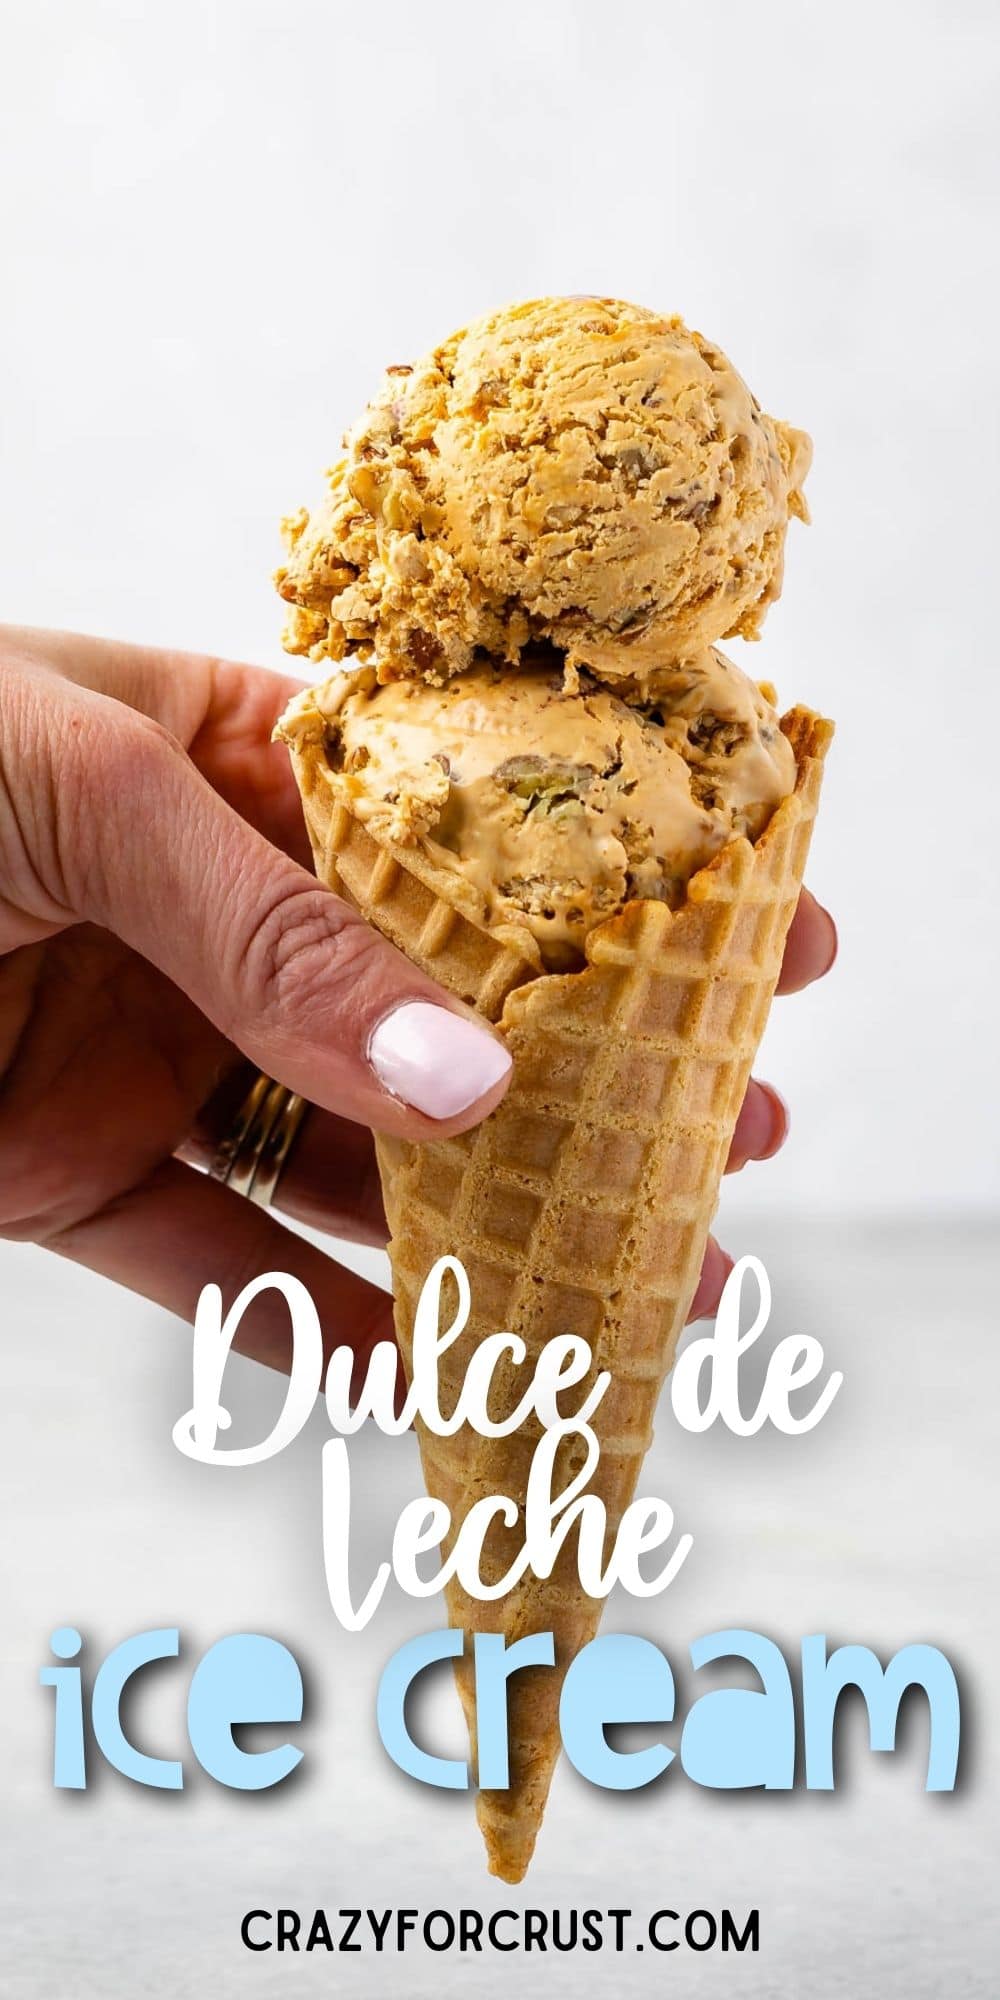 Hand holding a waffle cone filled with scoops of dulce de leche ice cream with recipe title on bottom of photo